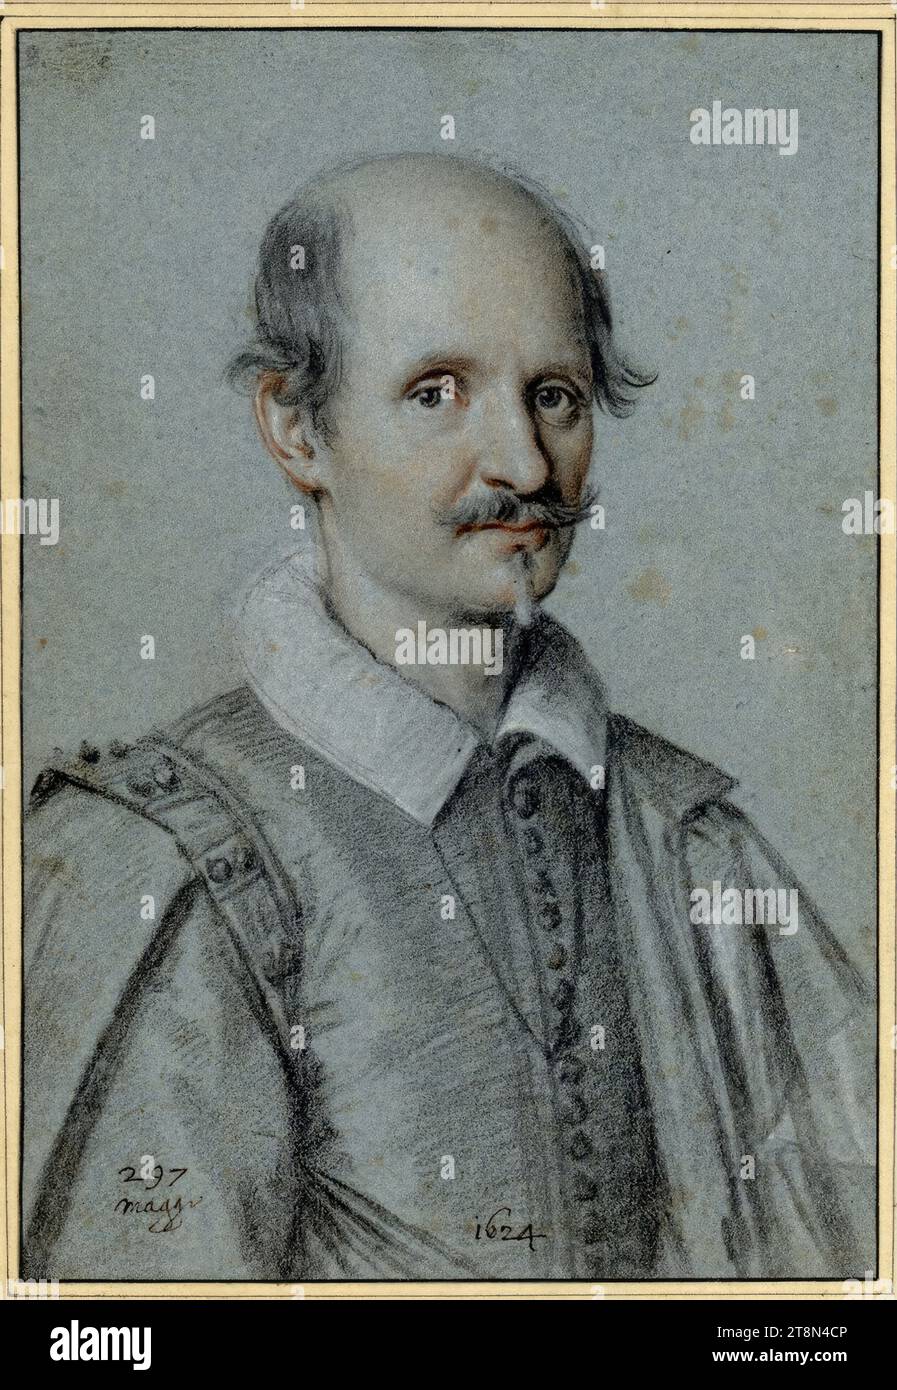 Half-length portrait of the poet Tommaso Stigliano (1573-1651) with bald head, mustache brushed up and bow tie to the right, Ottavio Leoni (Rome around 1578 - 1630 Rome), drawing, chalk, red chalk, heightened with white, on blue paper, 23.3 x 16 cm, l.l. Duke Albert of Saxe-Teschen, lower left handwritten ink '297 maggi'; center bottom '1624 Stock Photo